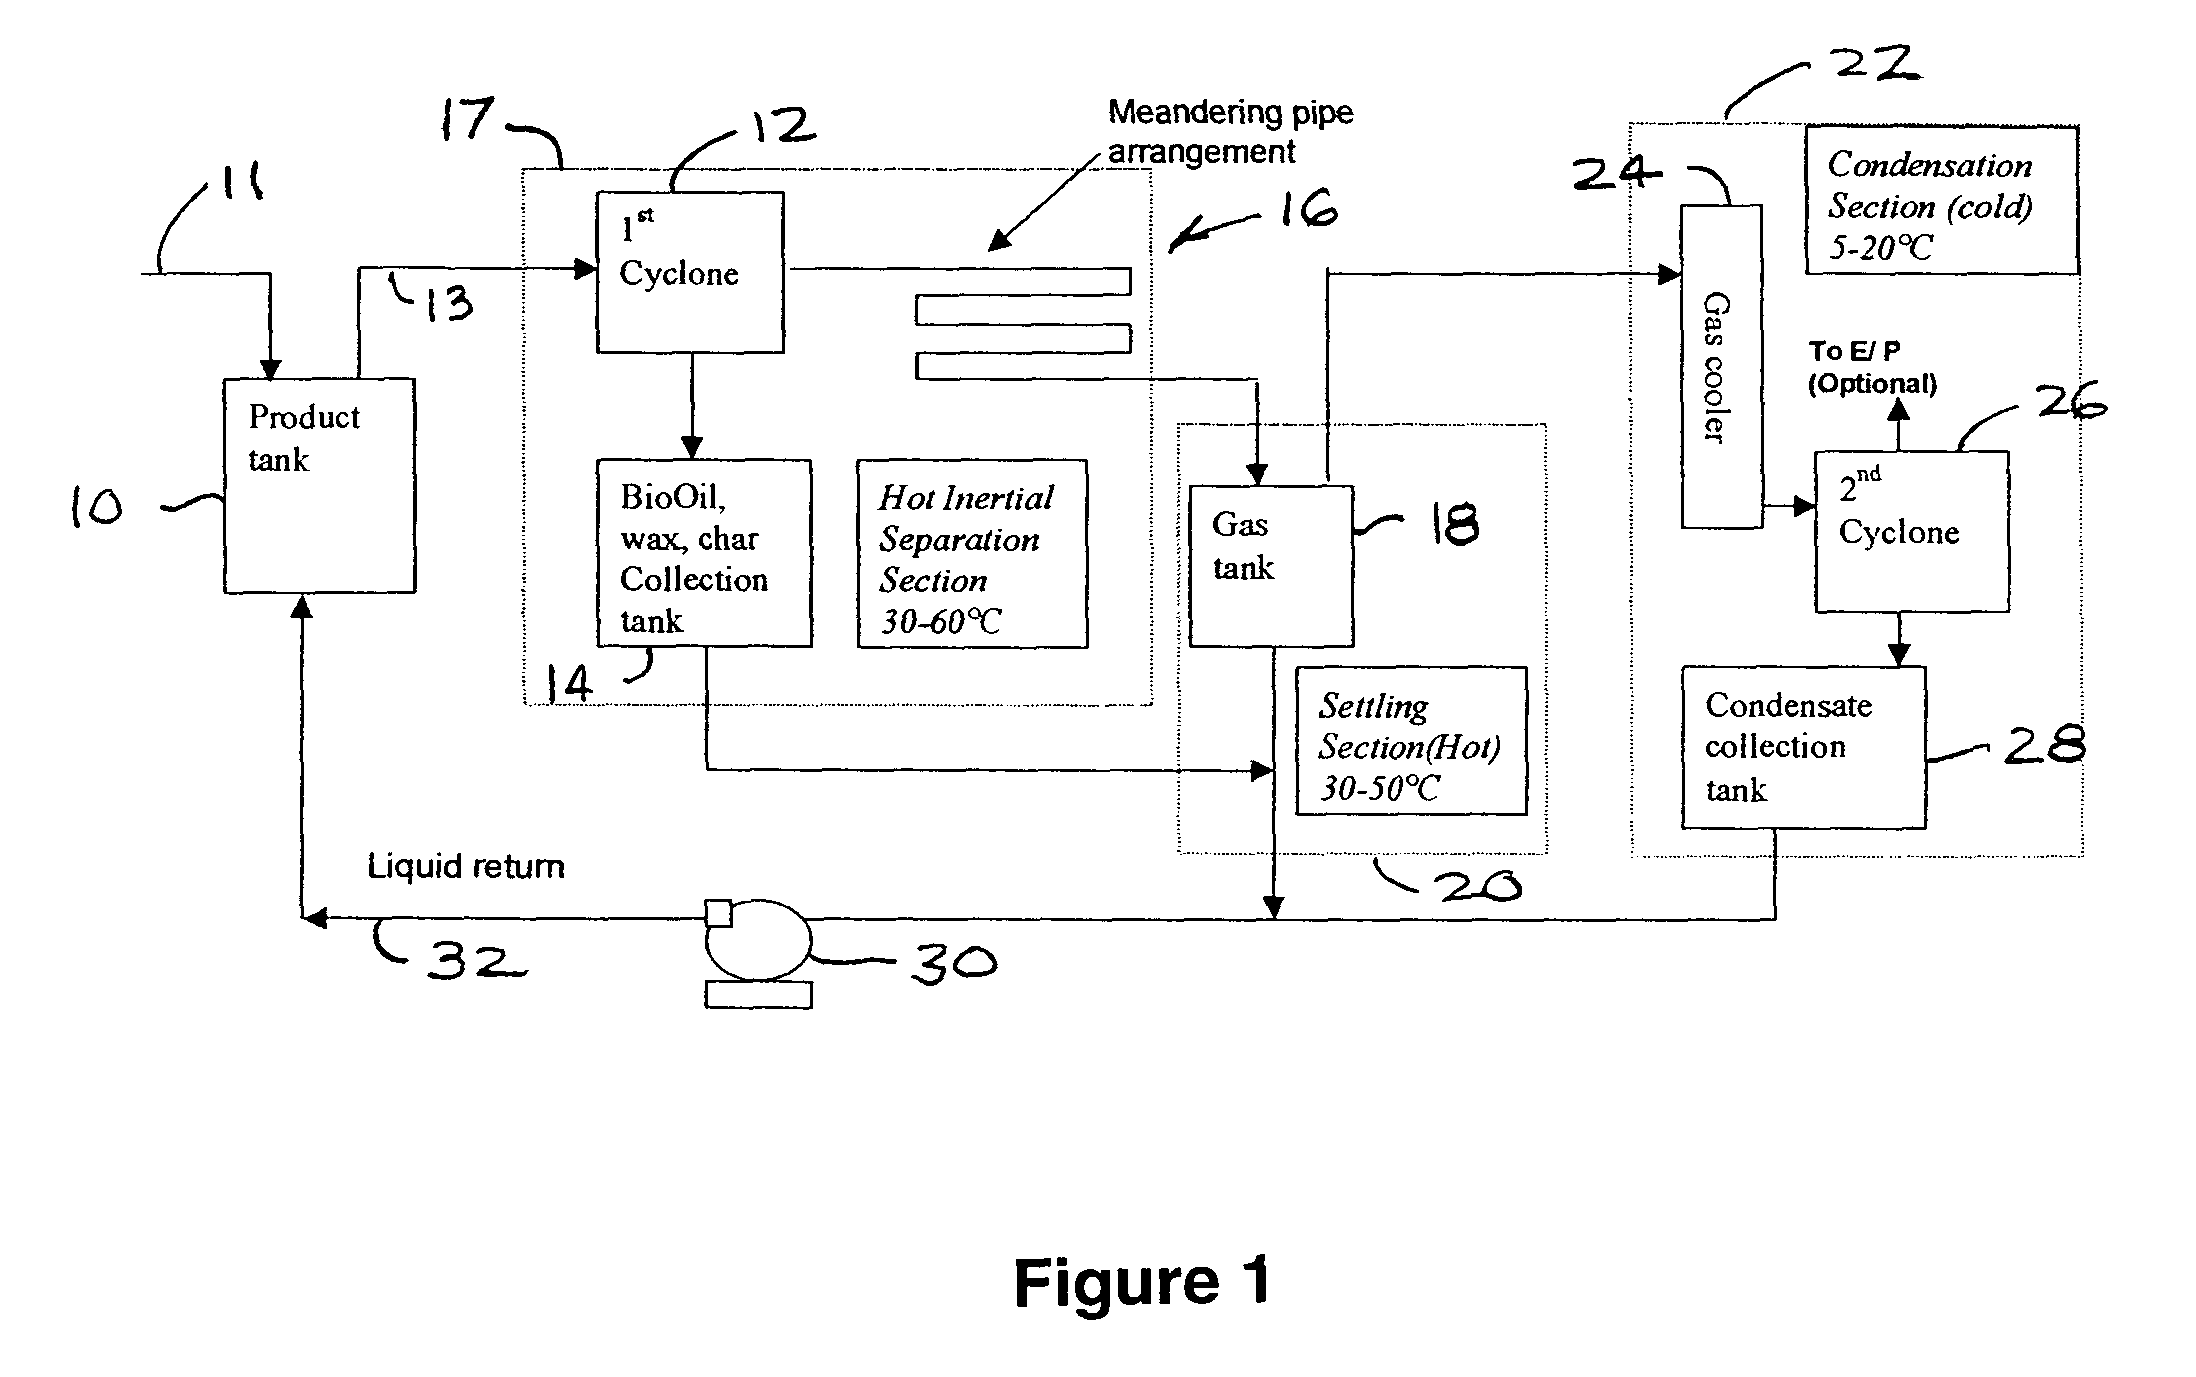 Apparatus for separating fouling contaminants from non-condensable gases at the end of a pyrolysis/thermolysis of biomass process